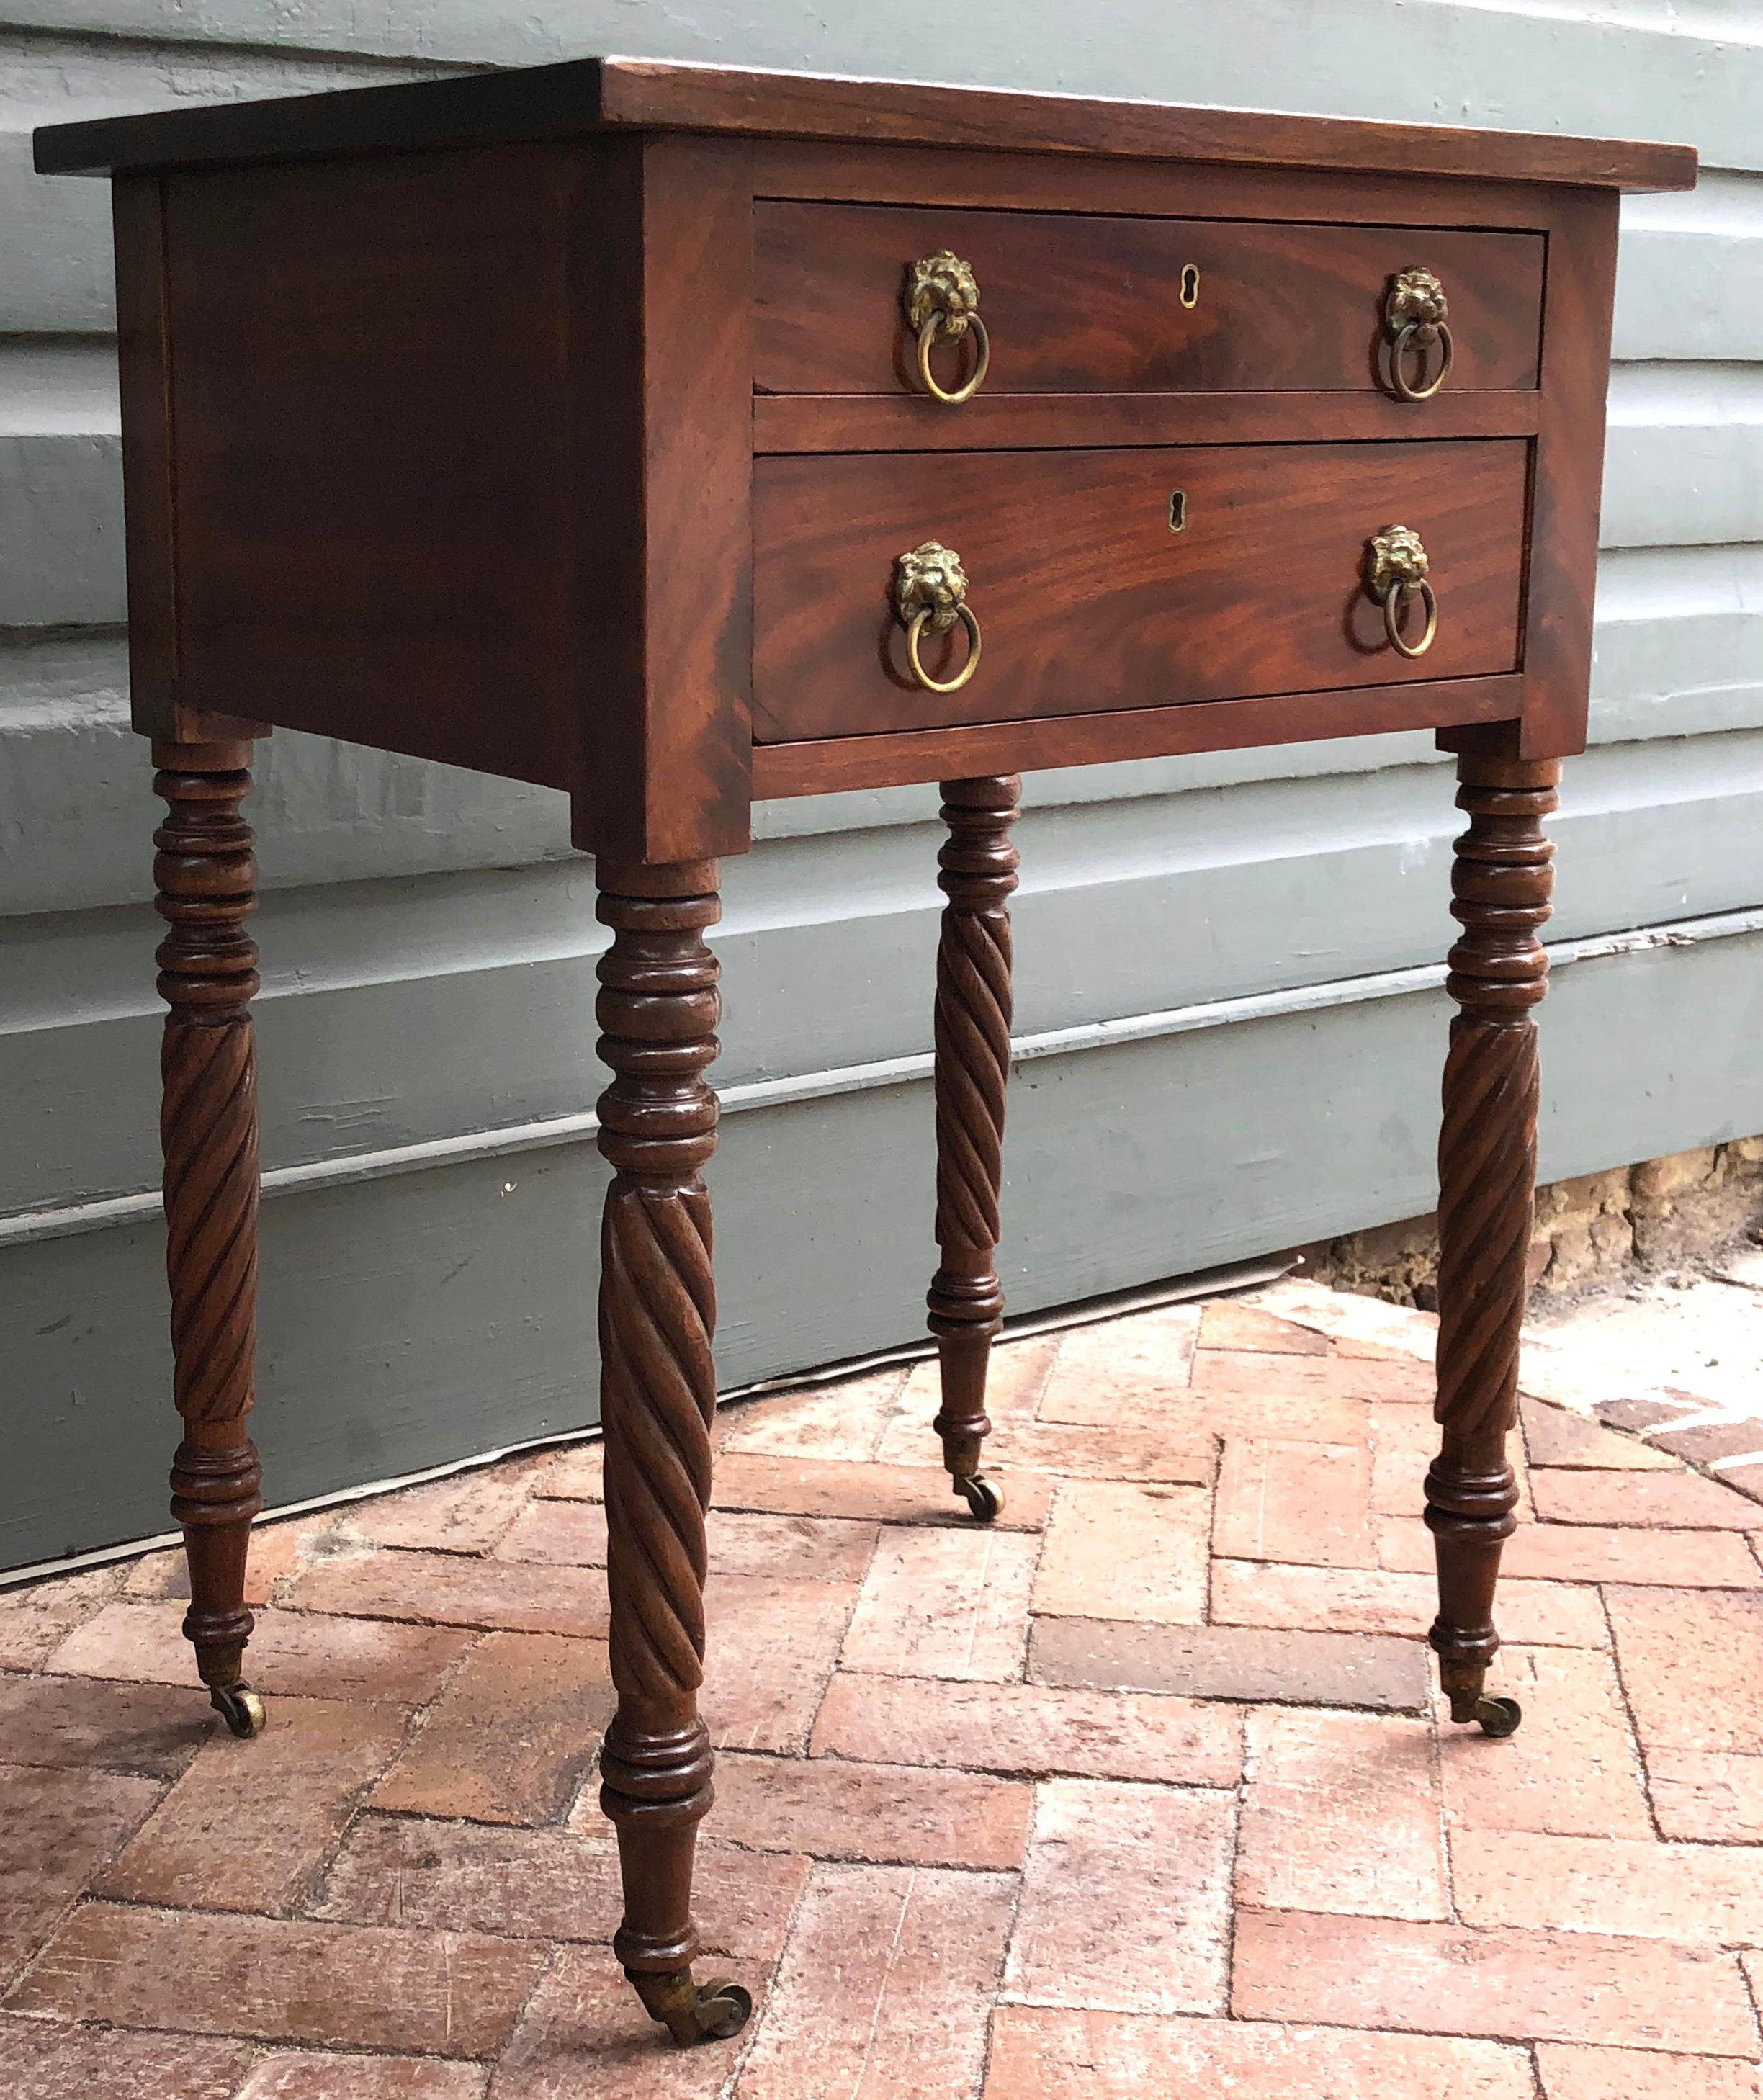 American Work/Side Table Made of Mahogany with Poplar Secondary wood, Circa 1820. The table retains the original lion head brasses and cup casters. Notice the rope turnings of the legs are opposite to each other. Mid Atlantic